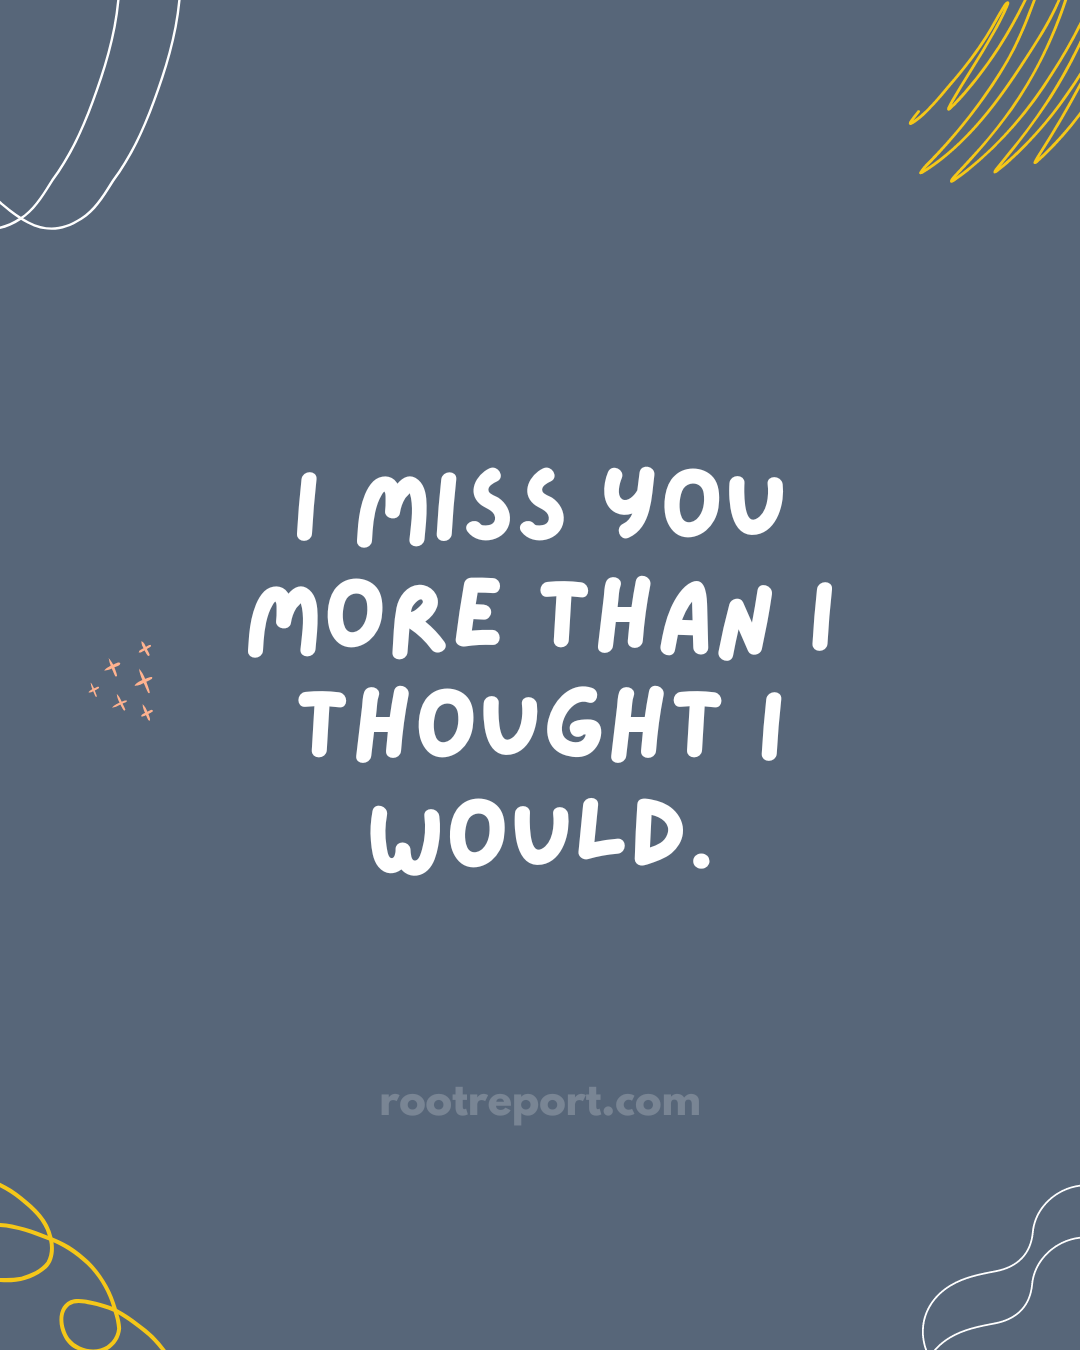 I miss you more than I thought I would.